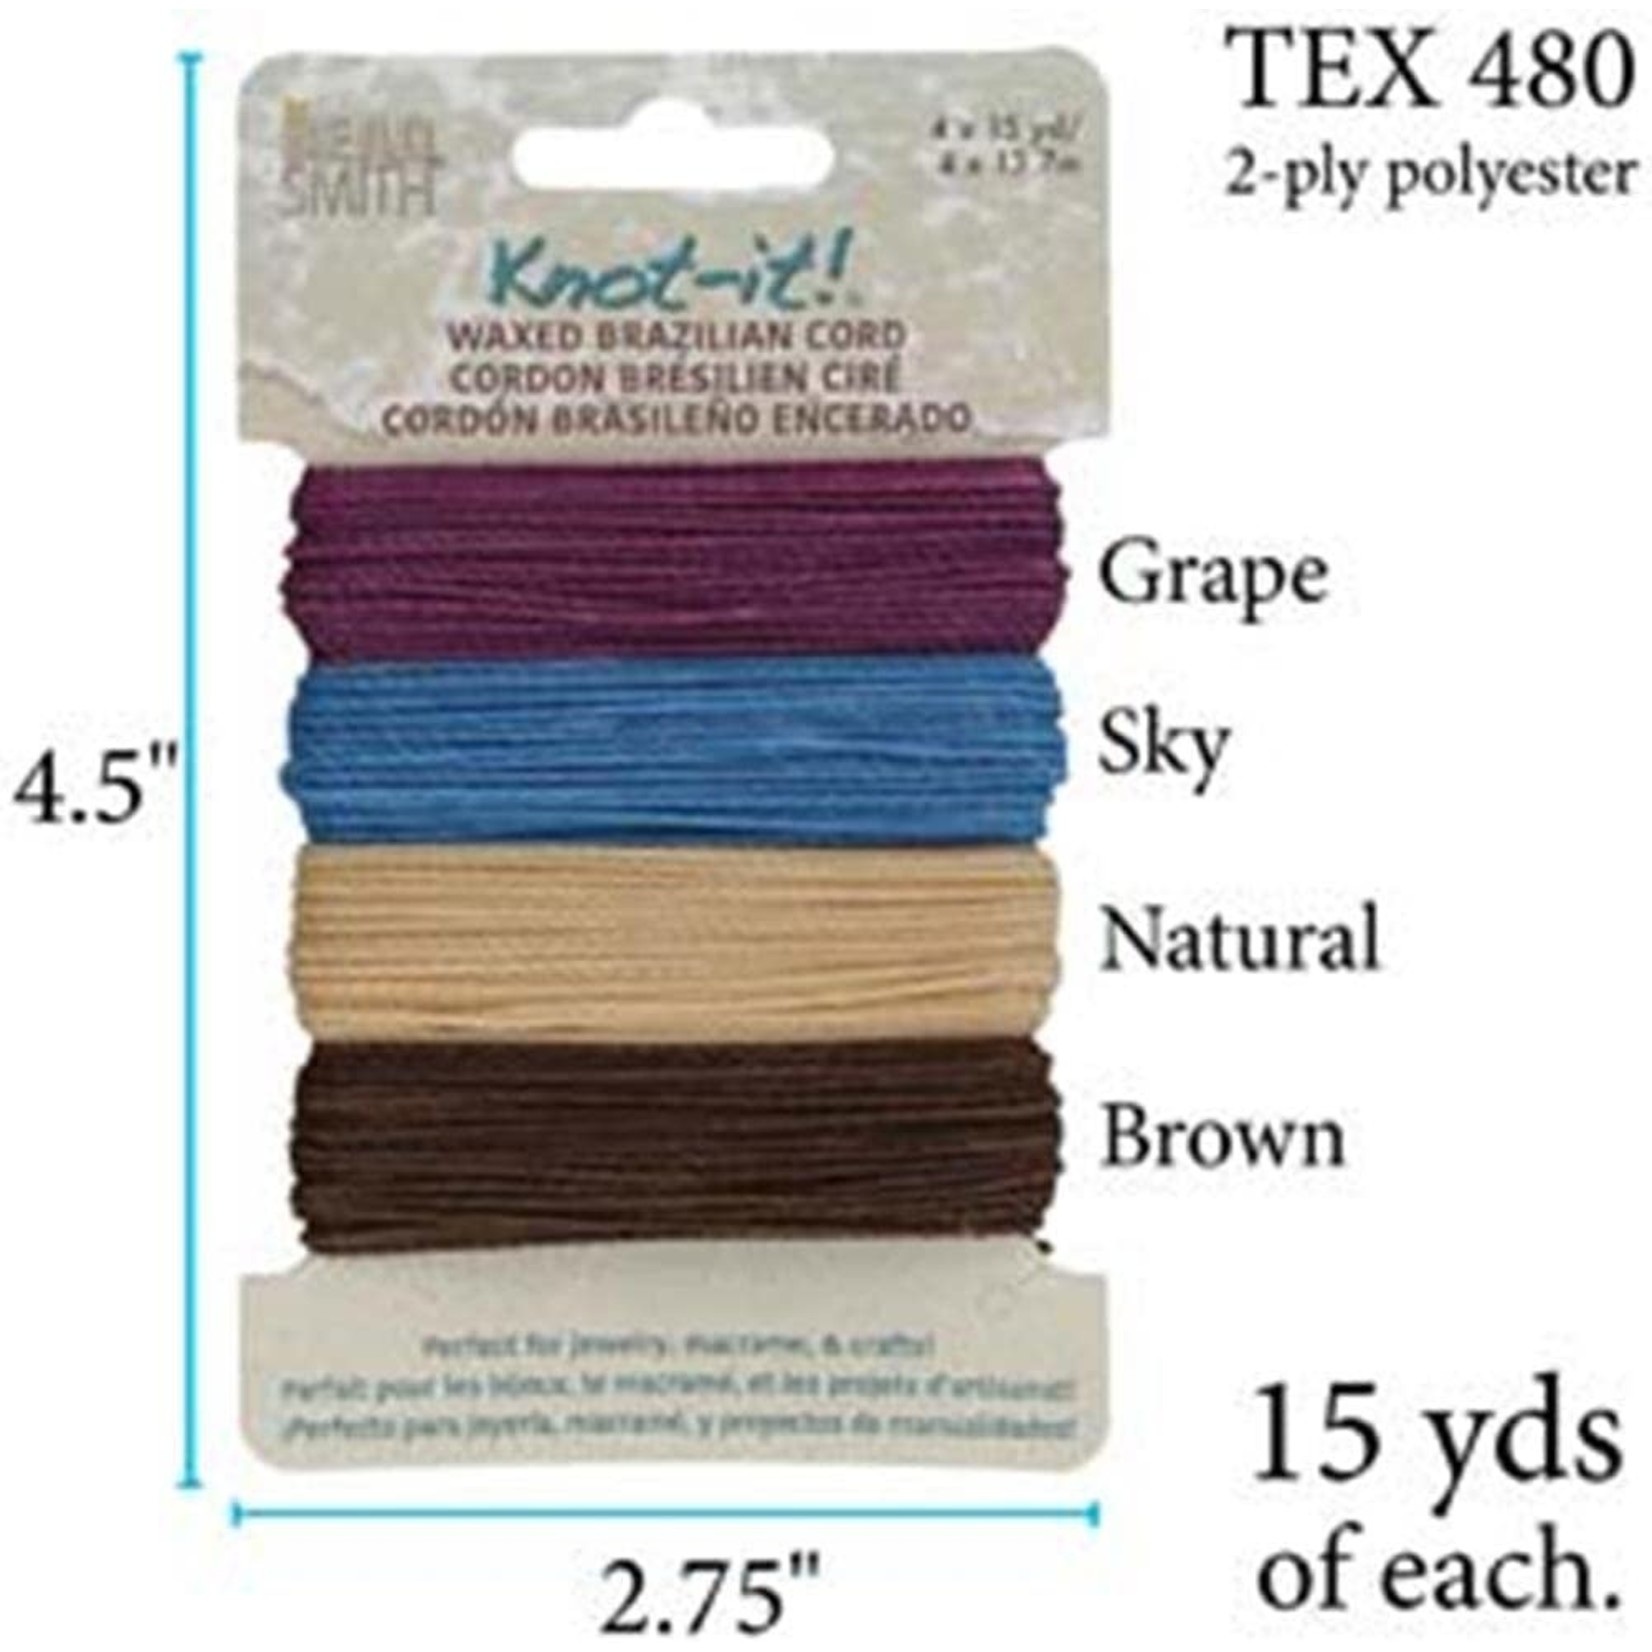 Knot-it! Waxed Brazilian Poly Cord - Adventures Calling 15 Yards/Color